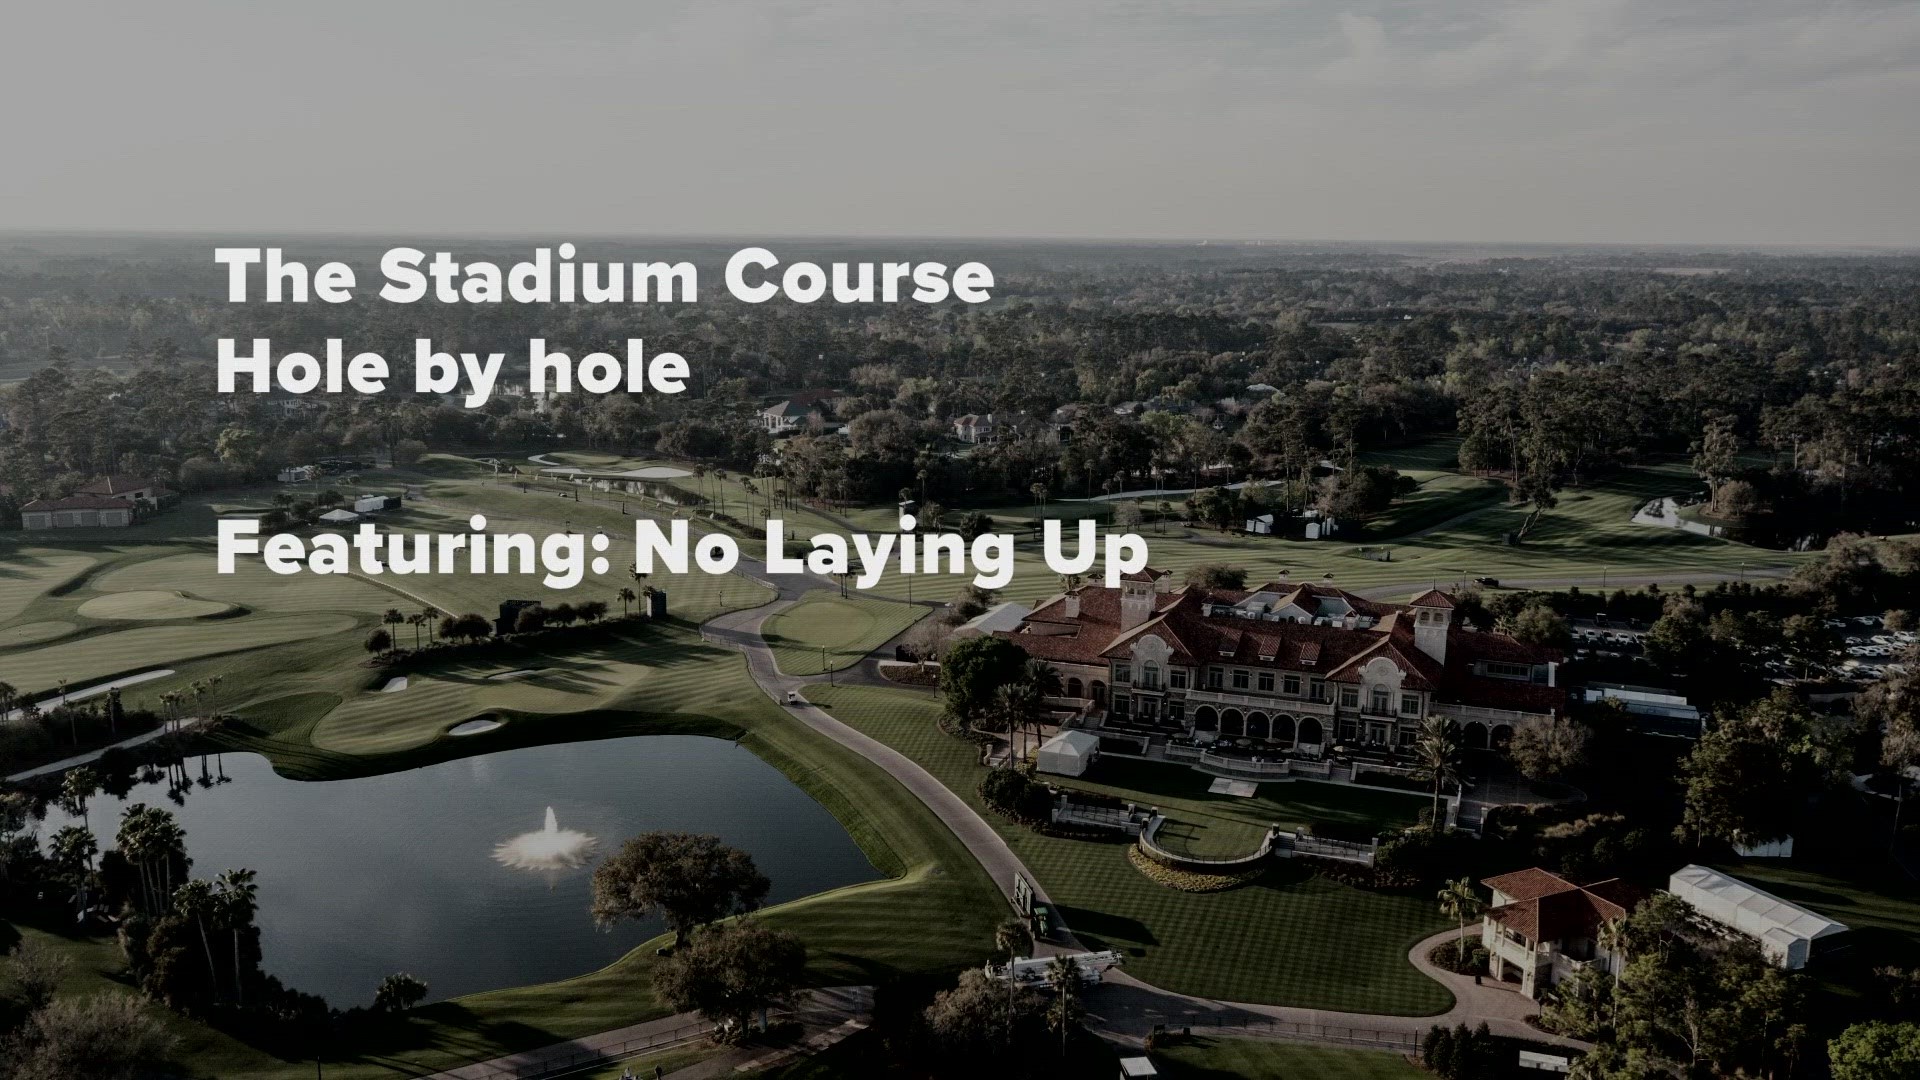 Chris Solomon and Todd Schuster (Tron Carter) give their descriptions of each hole at The Stadium Course.